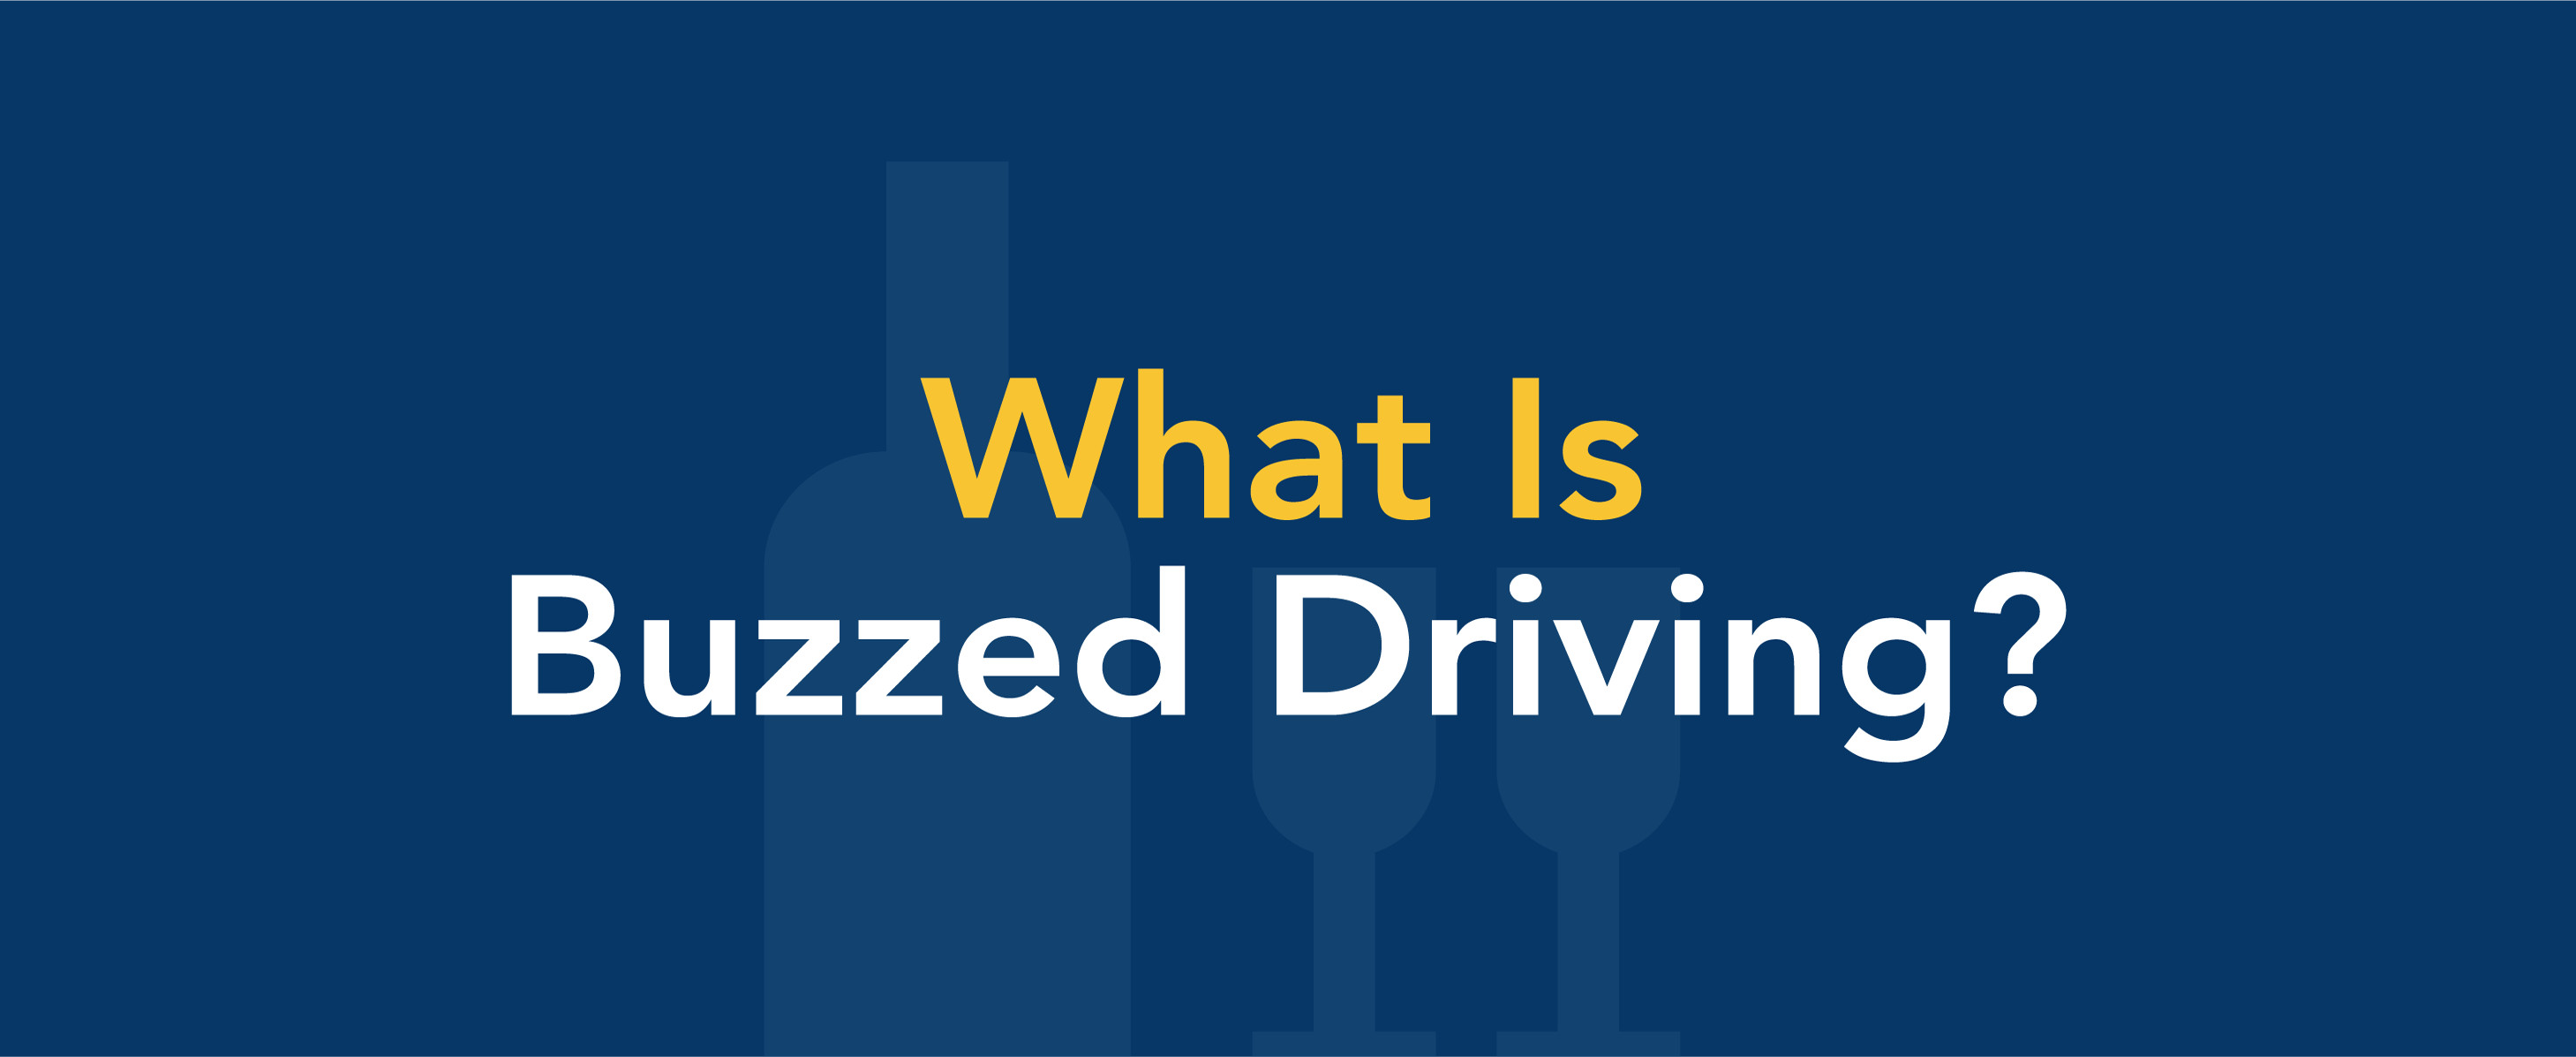 What is buzzed driving?